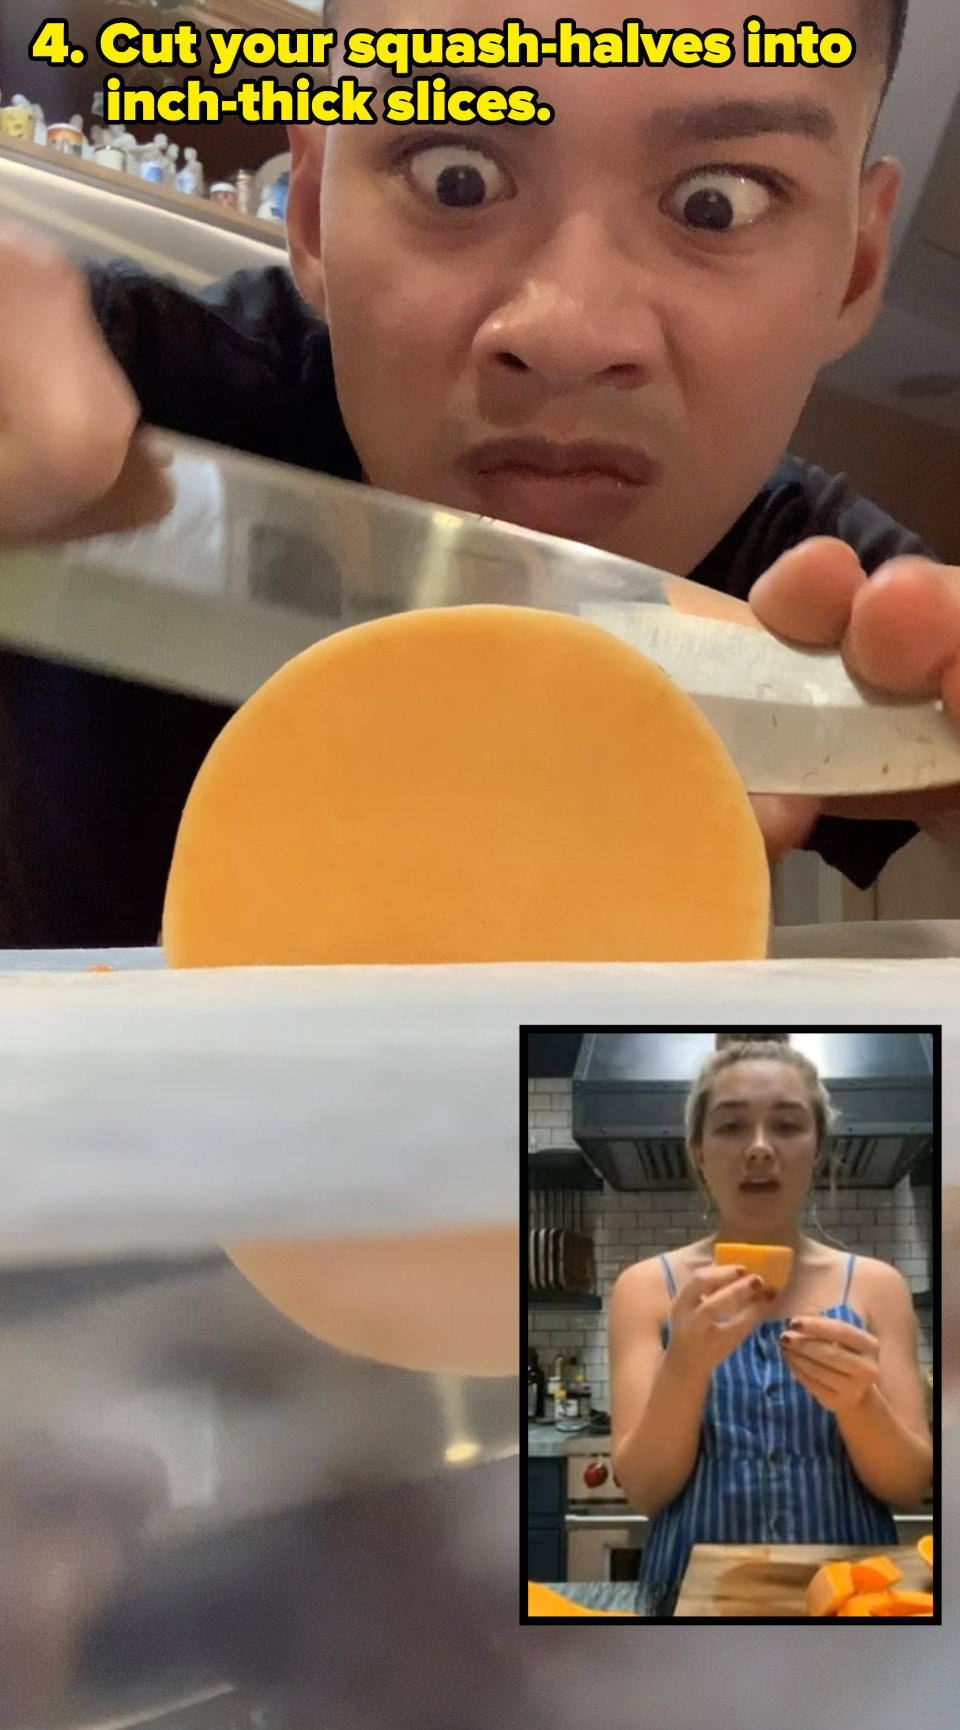 author cutting butternut squash into slices (inset) florence pugh holding a slice of butternut squash